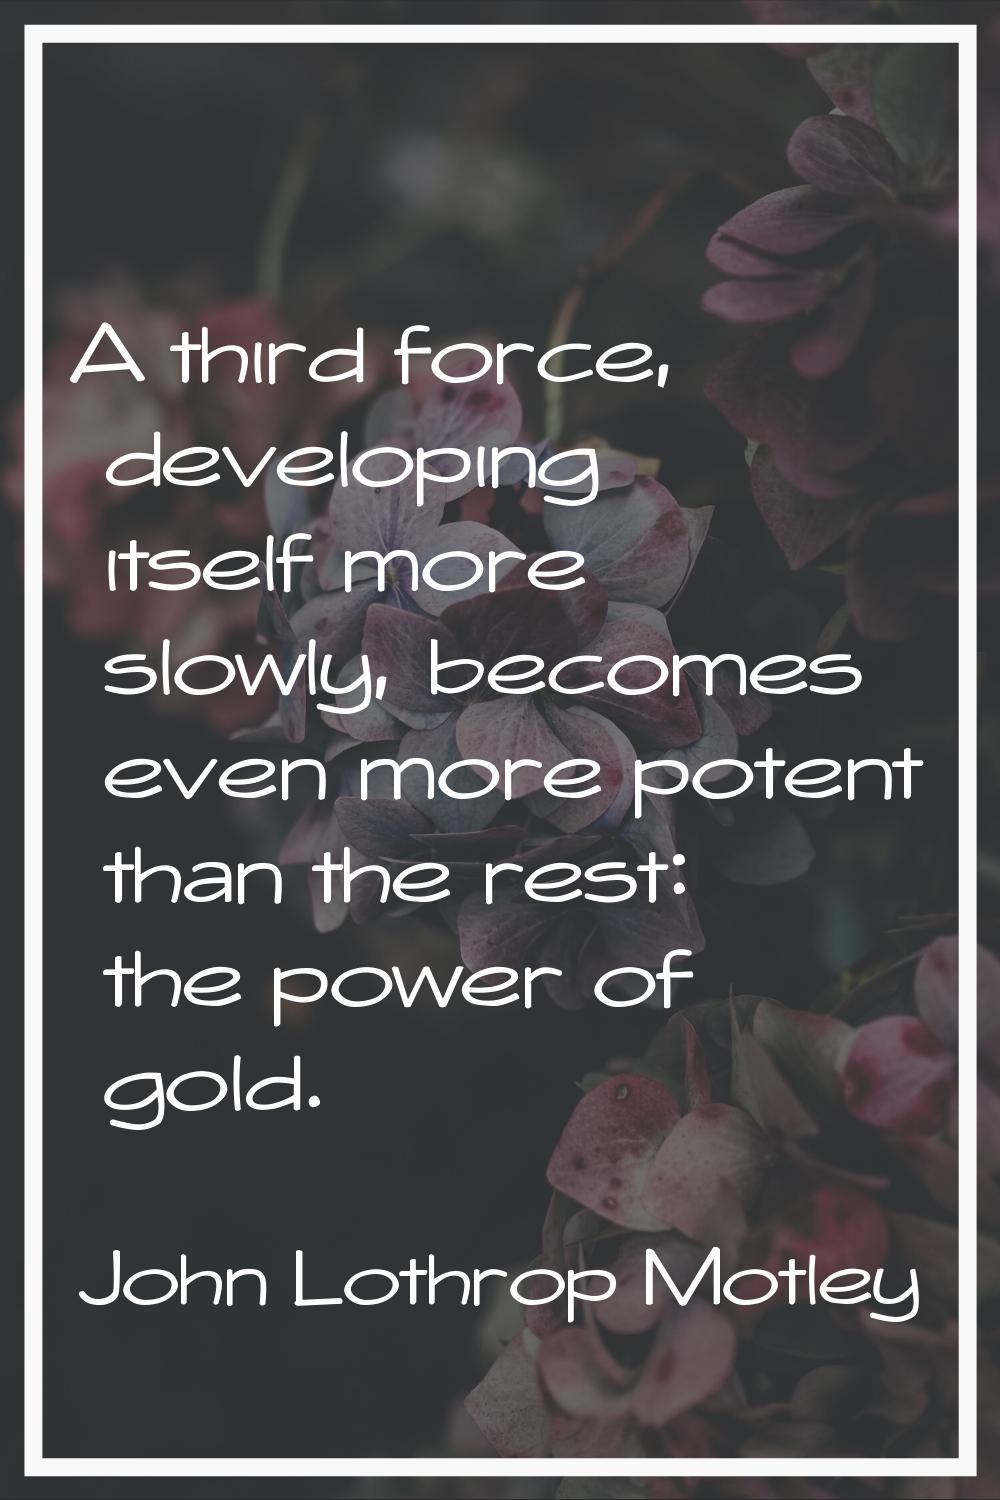 A third force, developing itself more slowly, becomes even more potent than the rest: the power of 